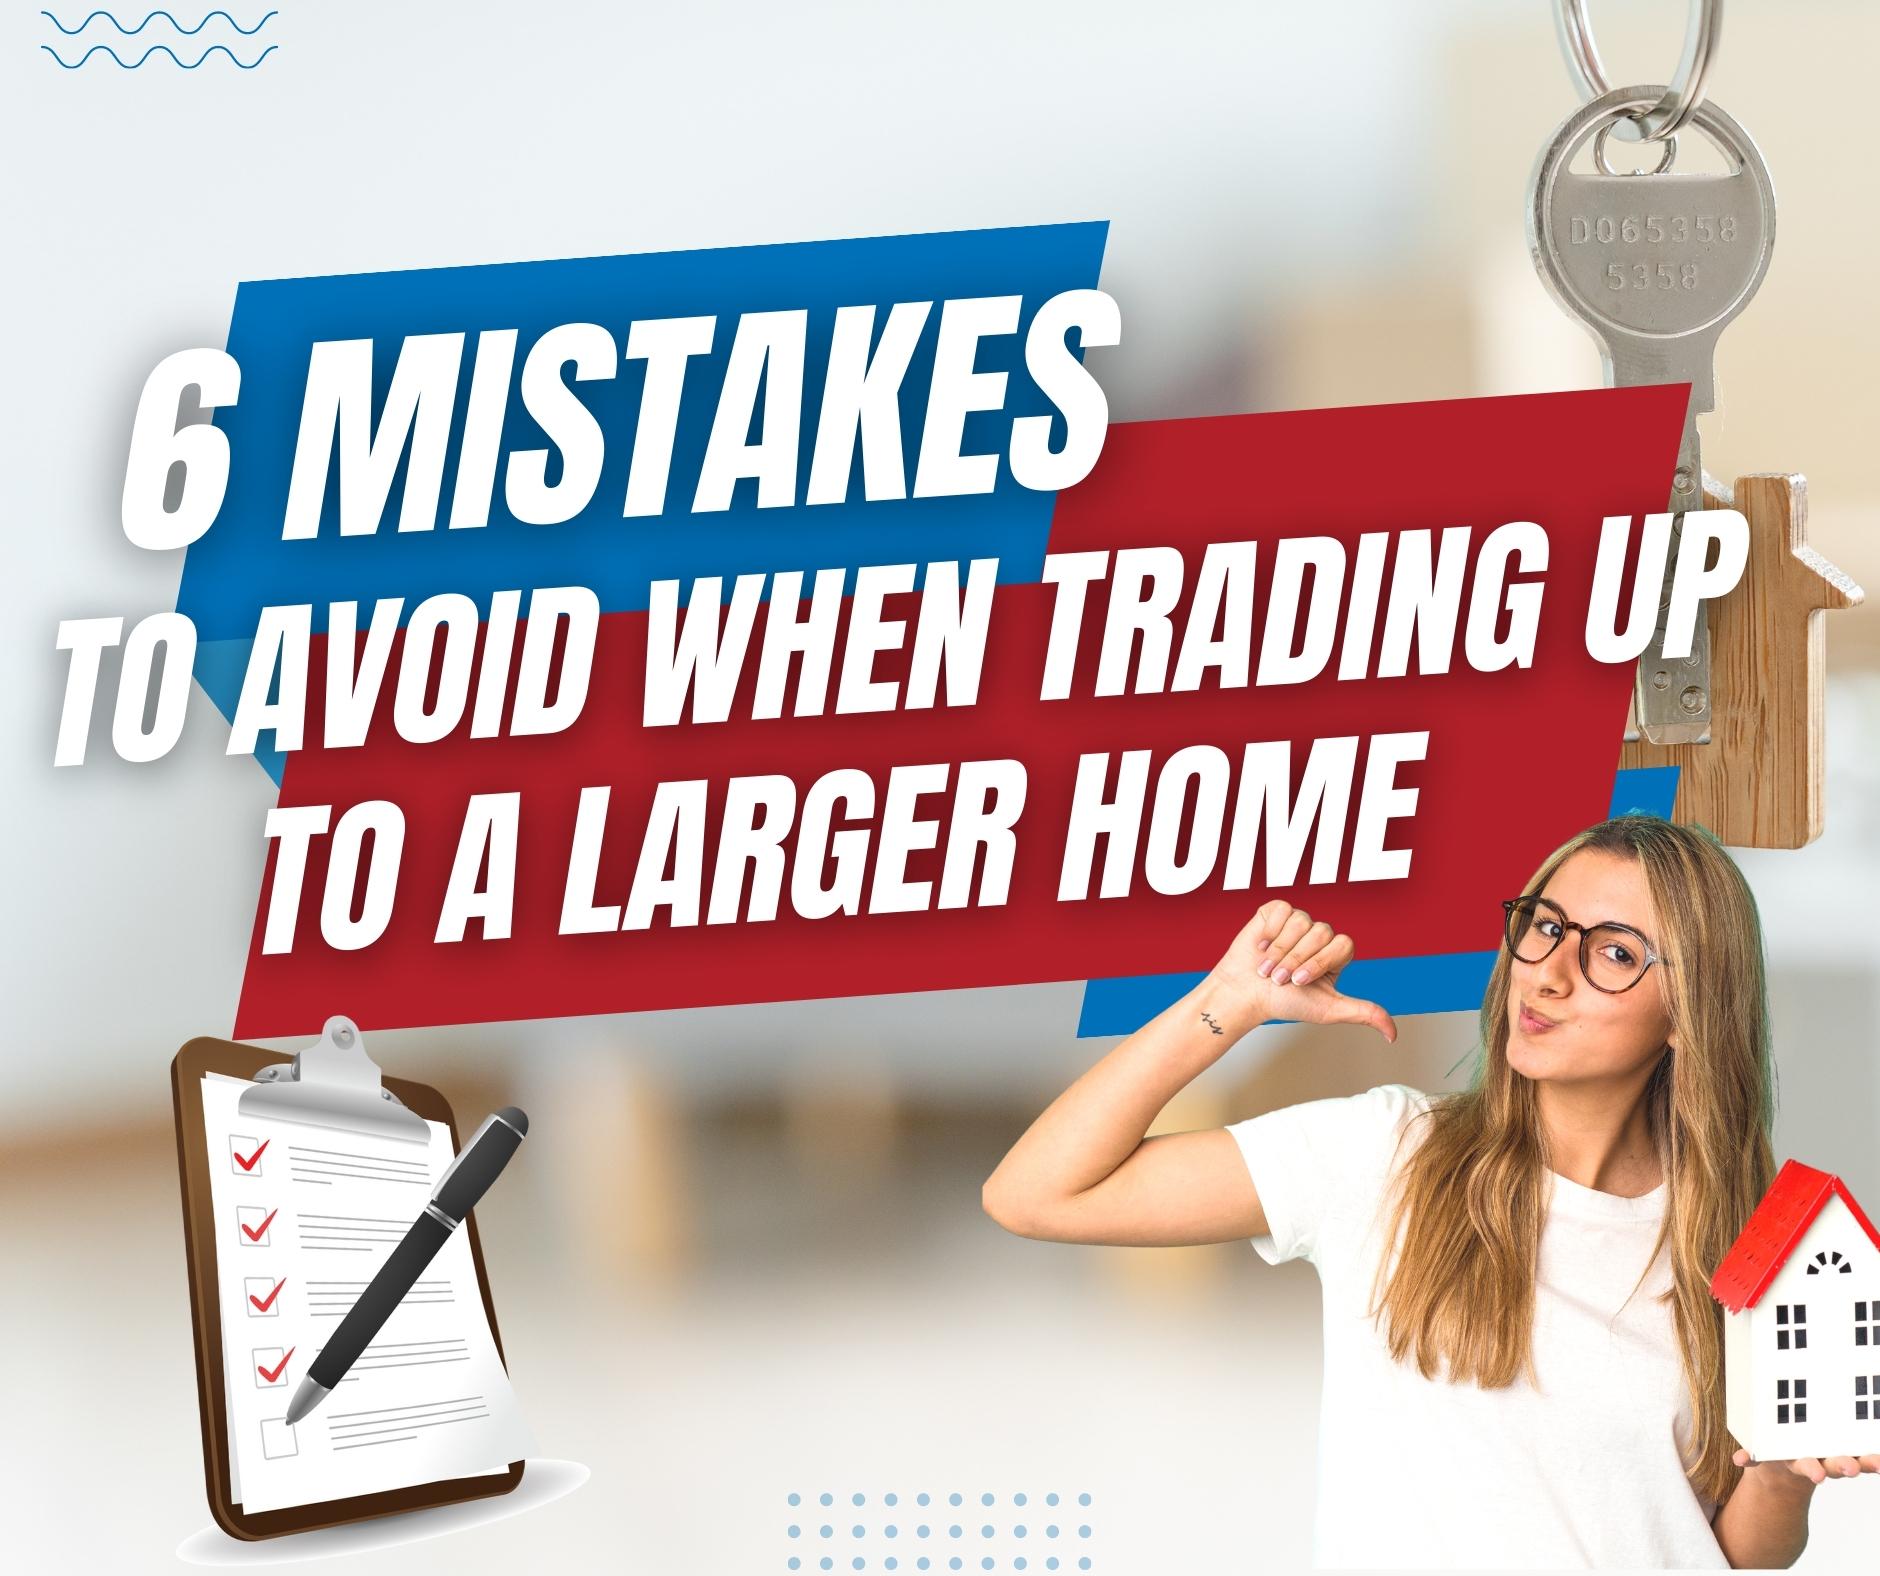 6 Mistakes To Avoid When Trading Up To A Larger Home